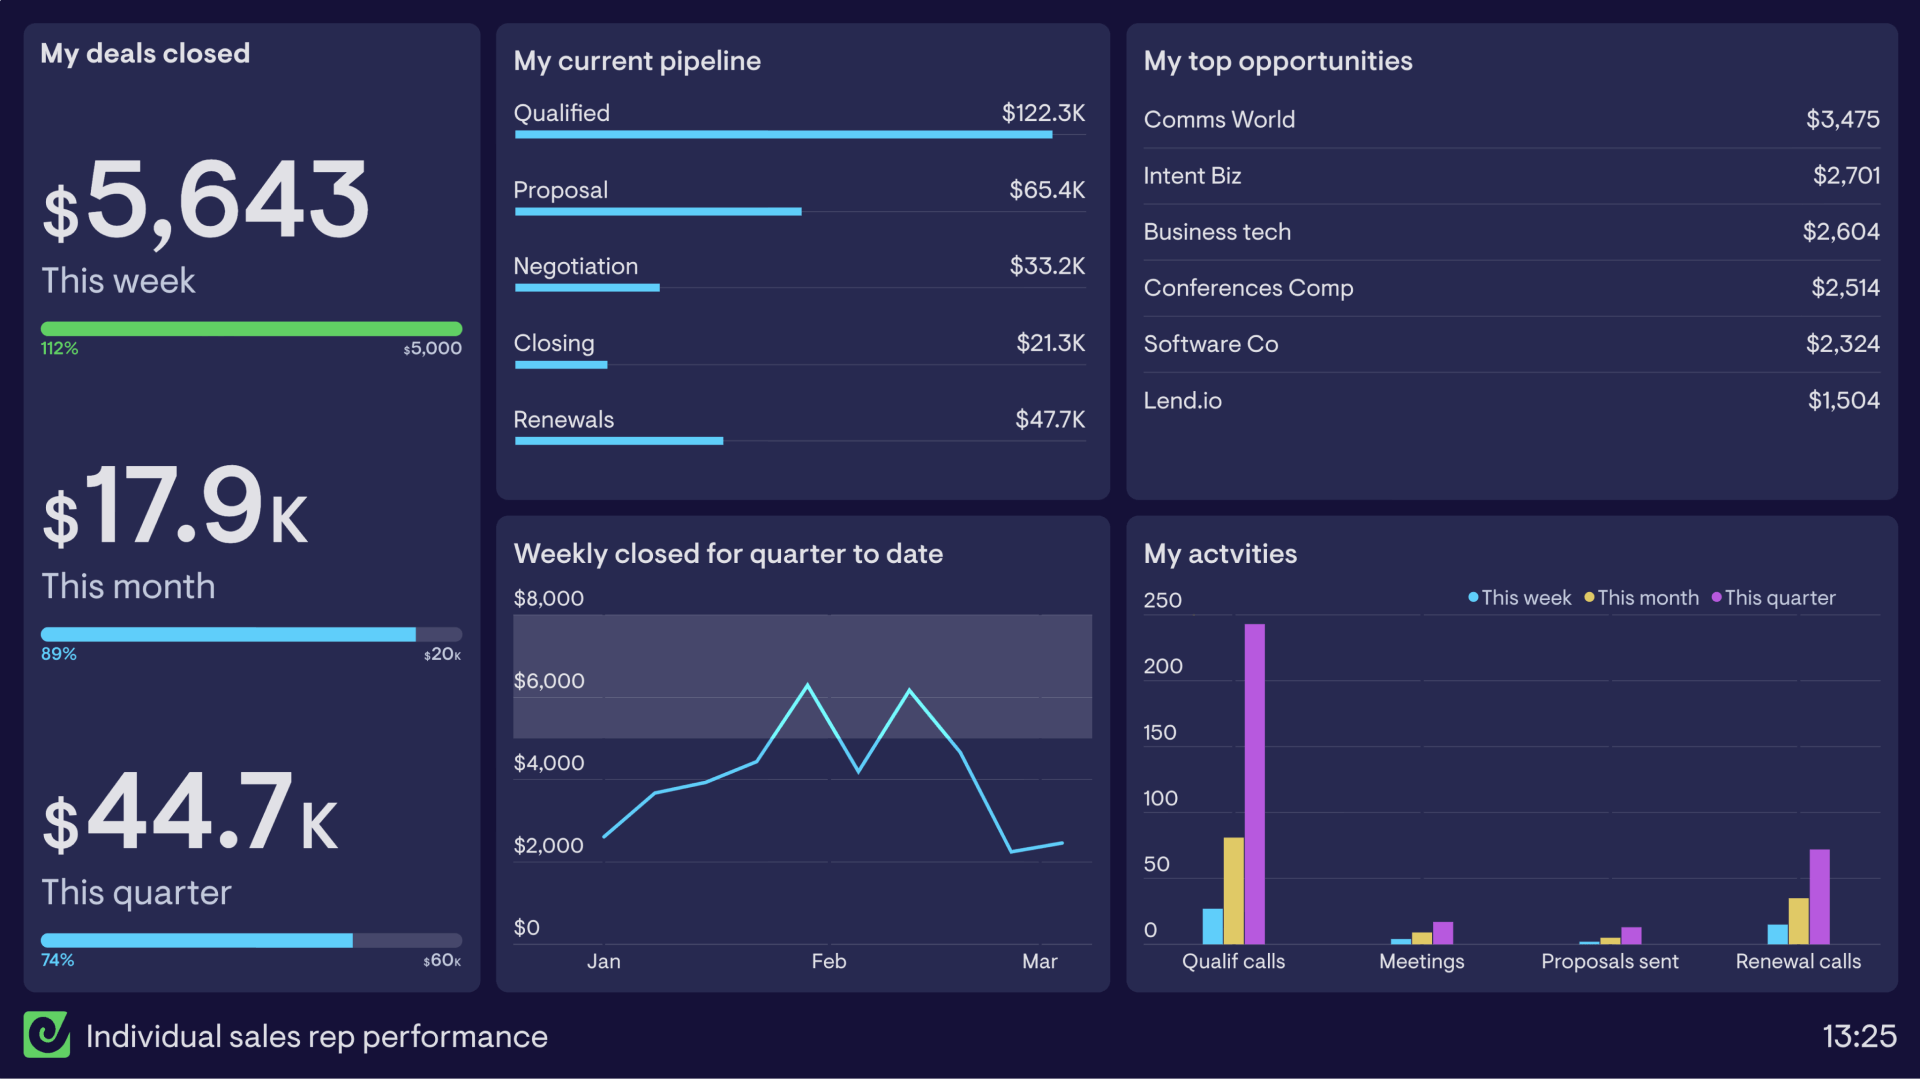 Example of a sales rep dashboard